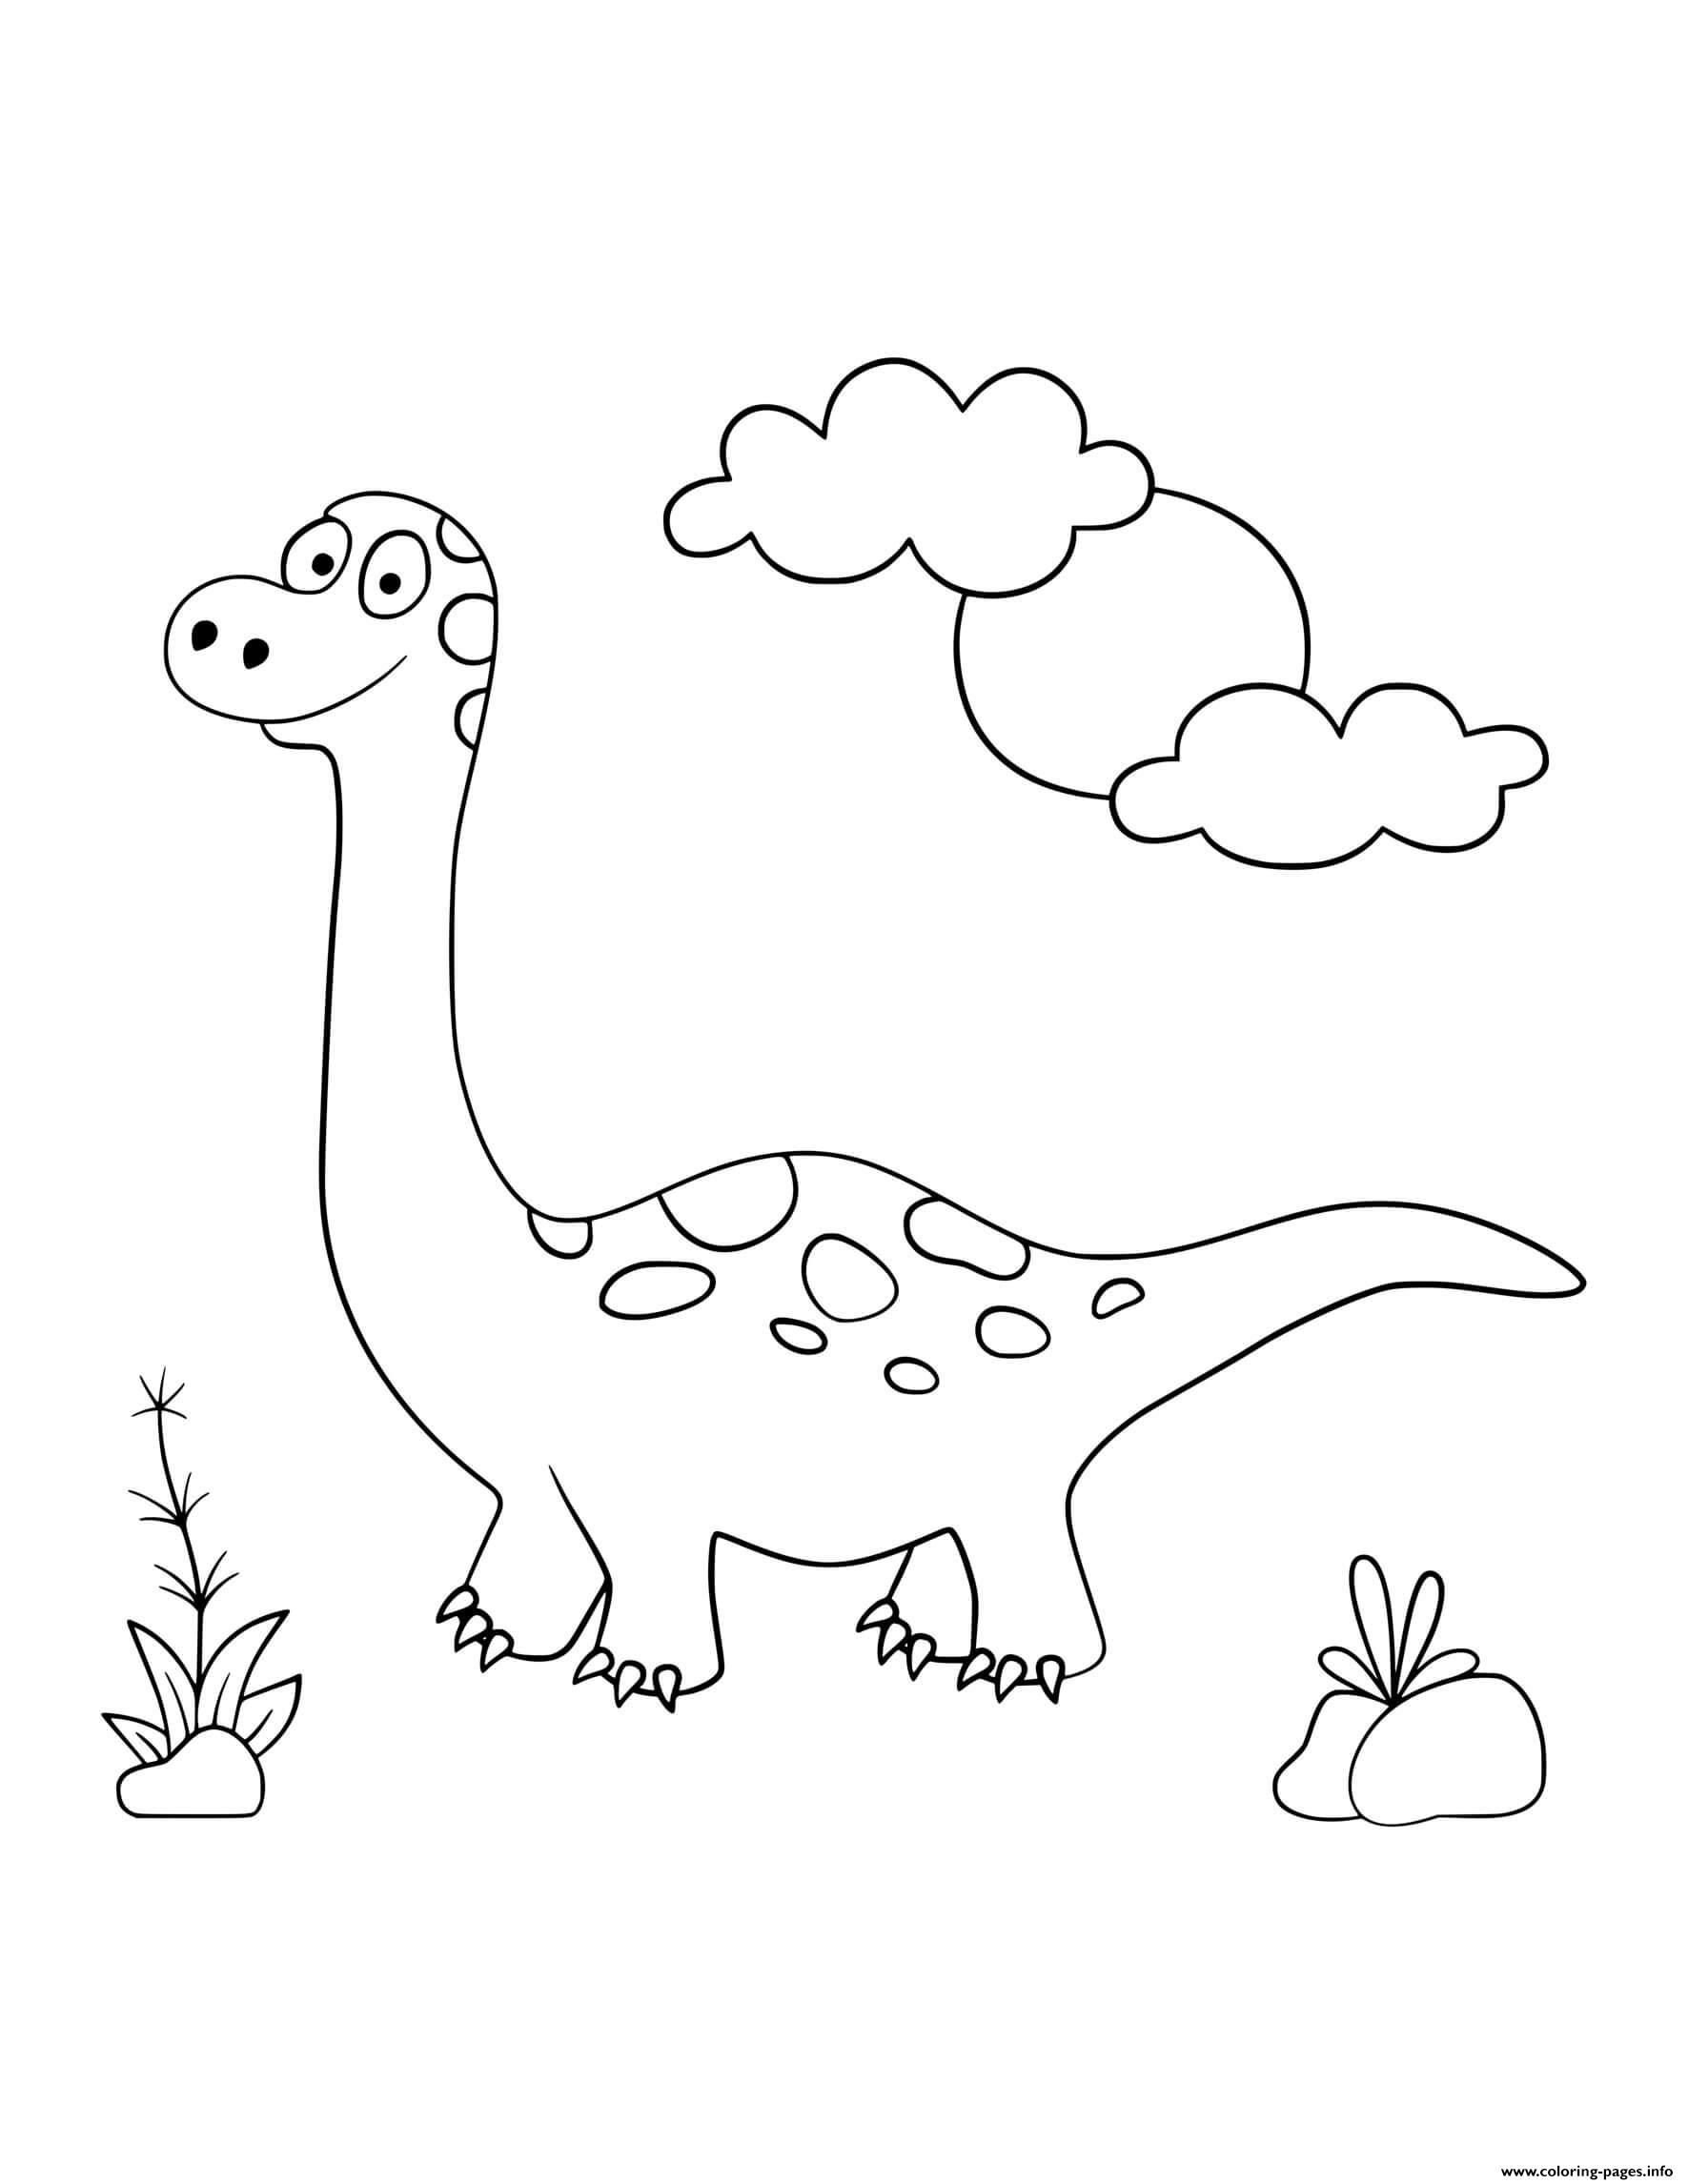 Dinosaur Cute Dino Sunny Day For Preschoolers coloring